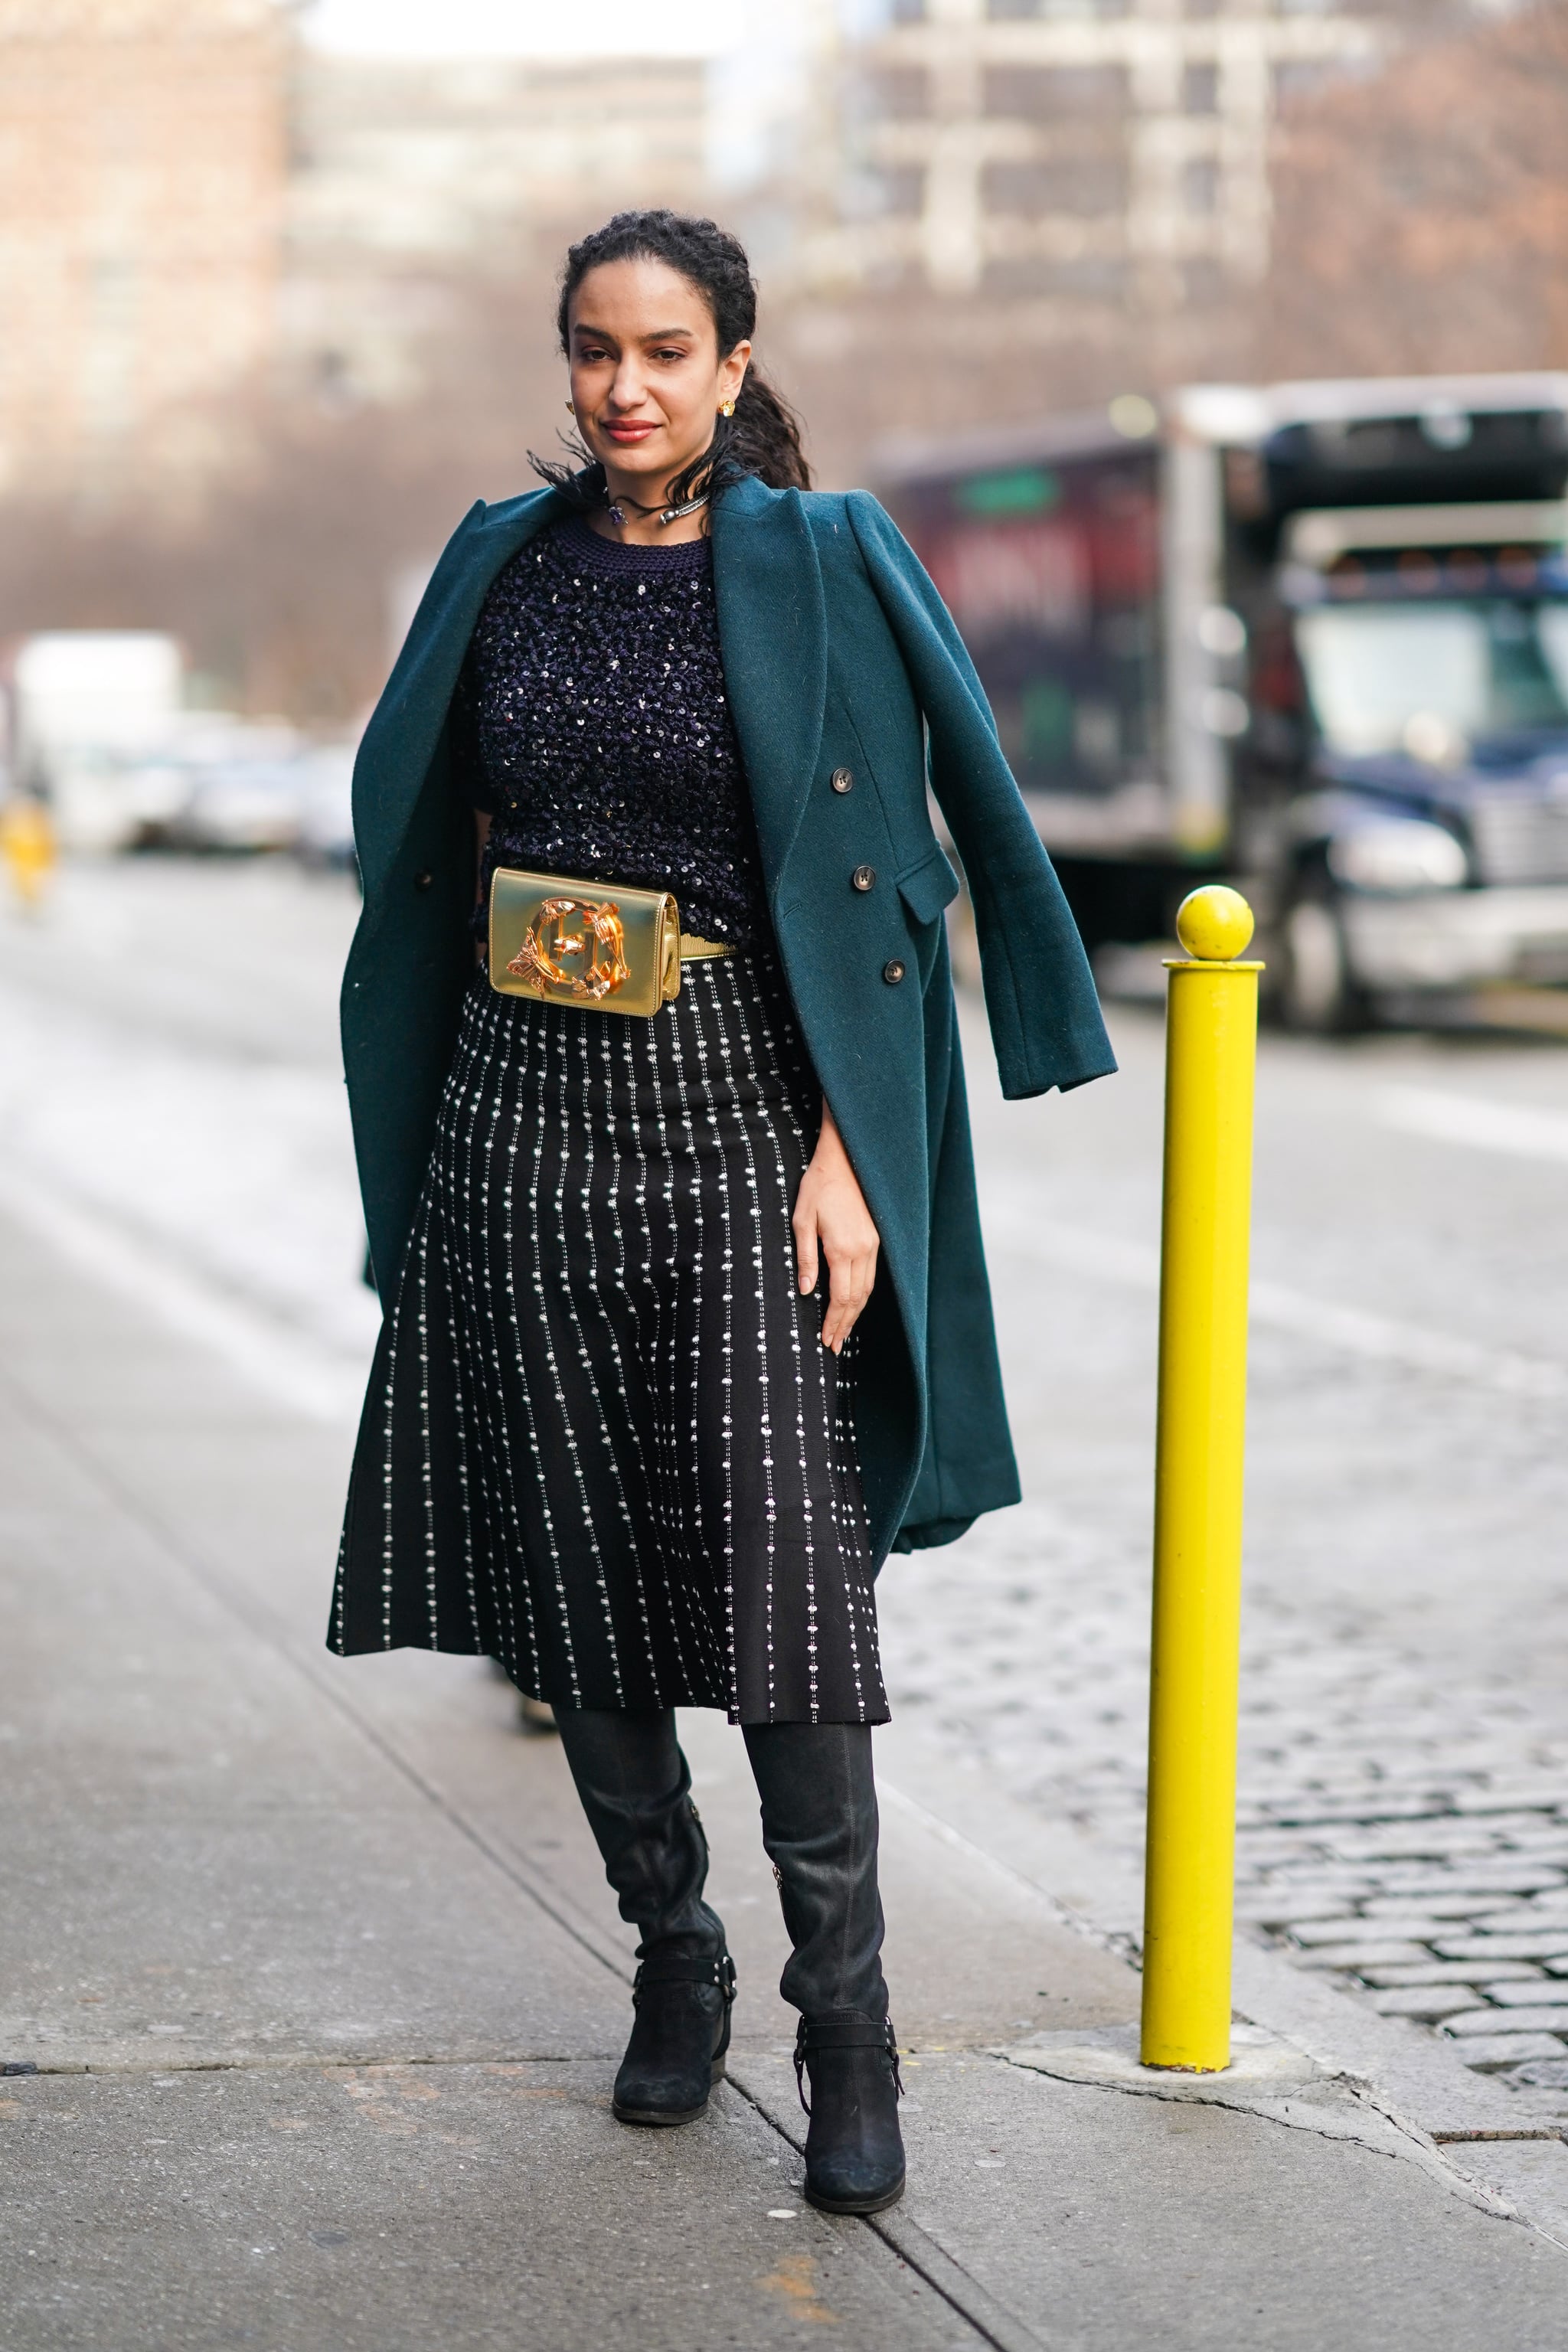 15 Outfit Ideas With Studded Belts - Styleoholic